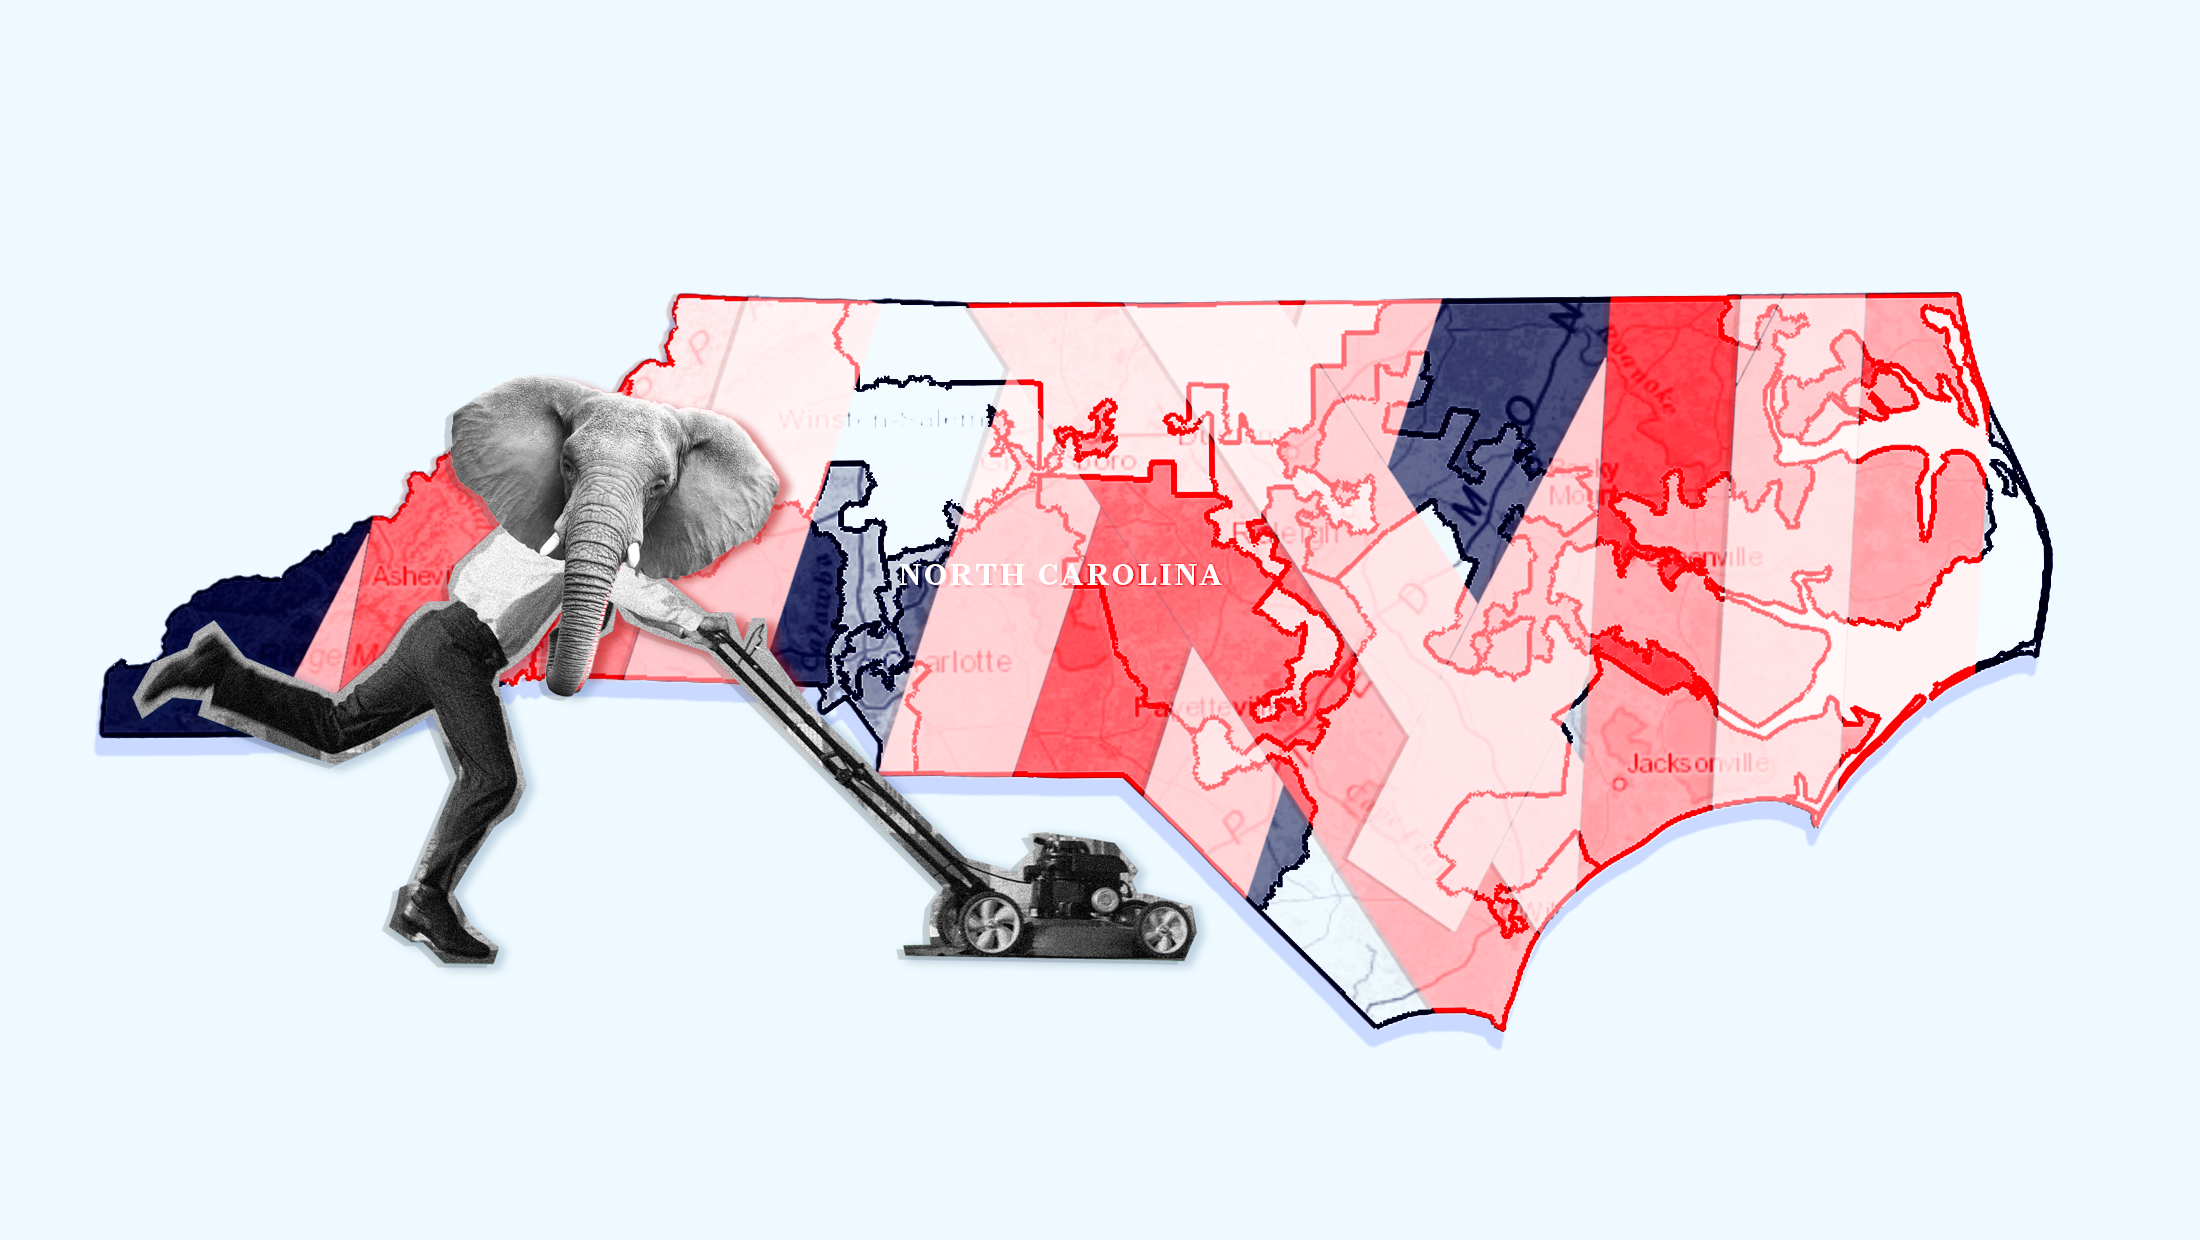 An elephant wearing a suit pushing a lawn mower into a gerrymandered state of North Carolina